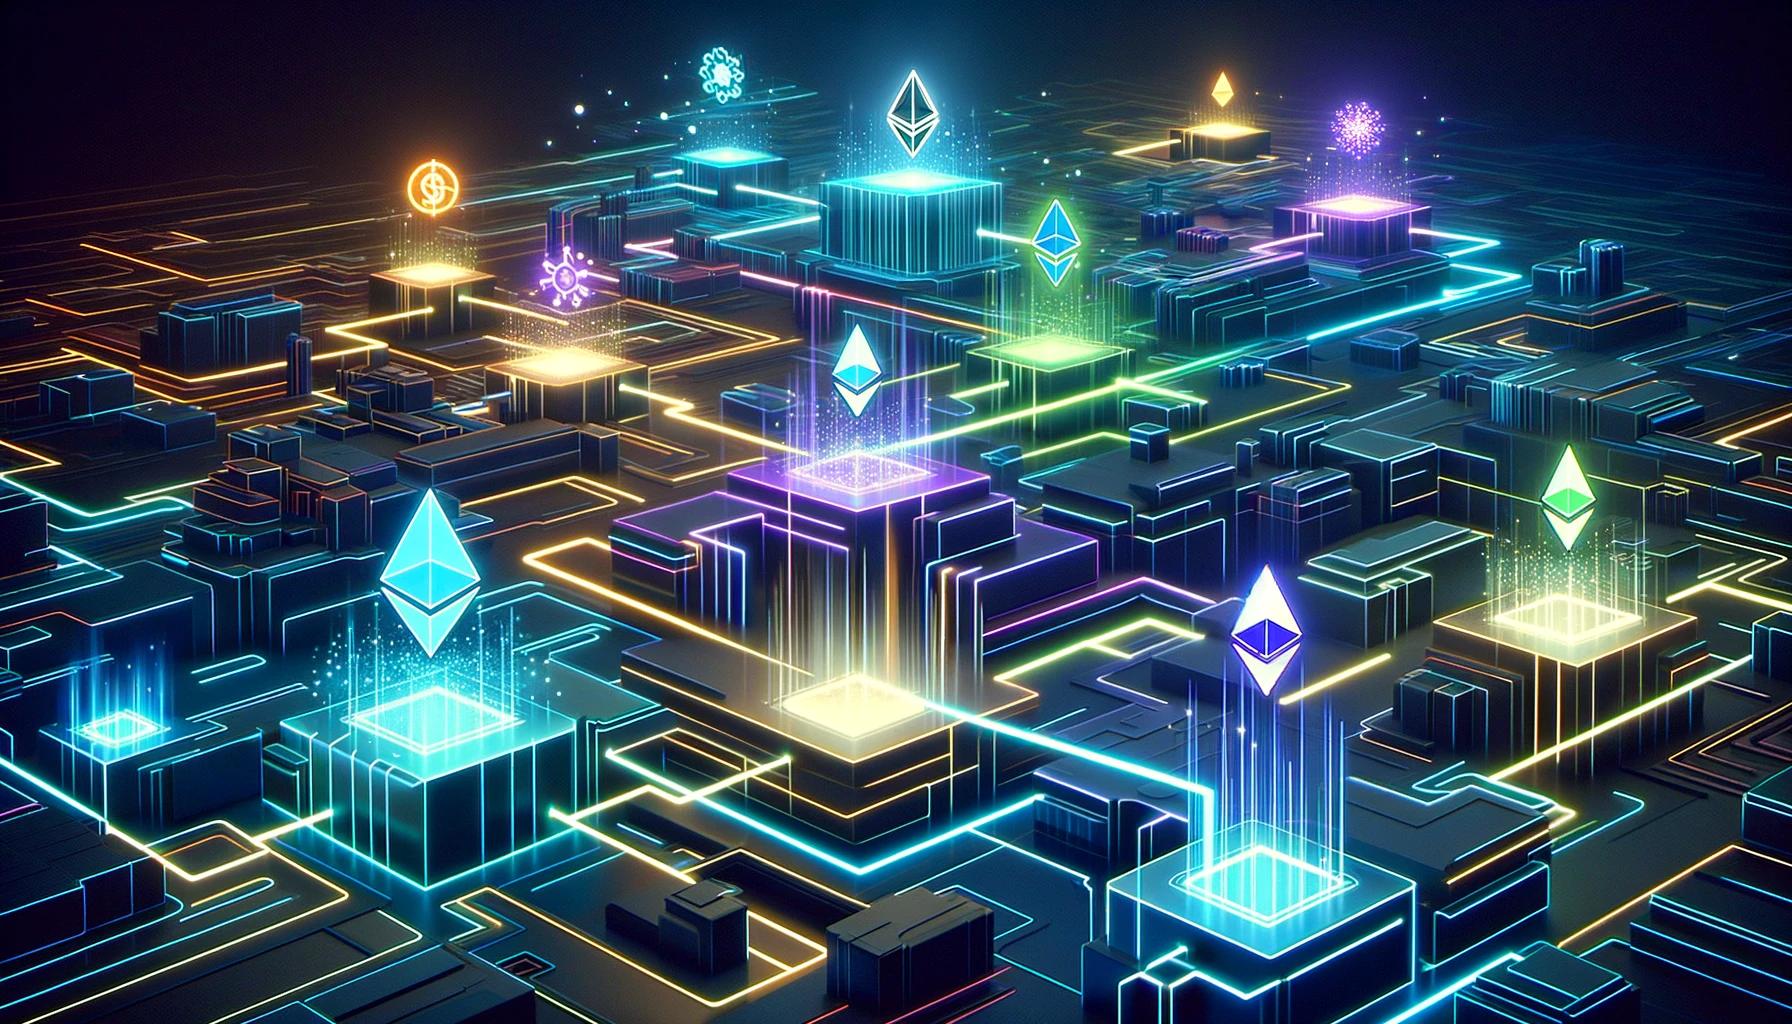 ethereum-s-l2s-sector-readies-to-ship-new-upgrades